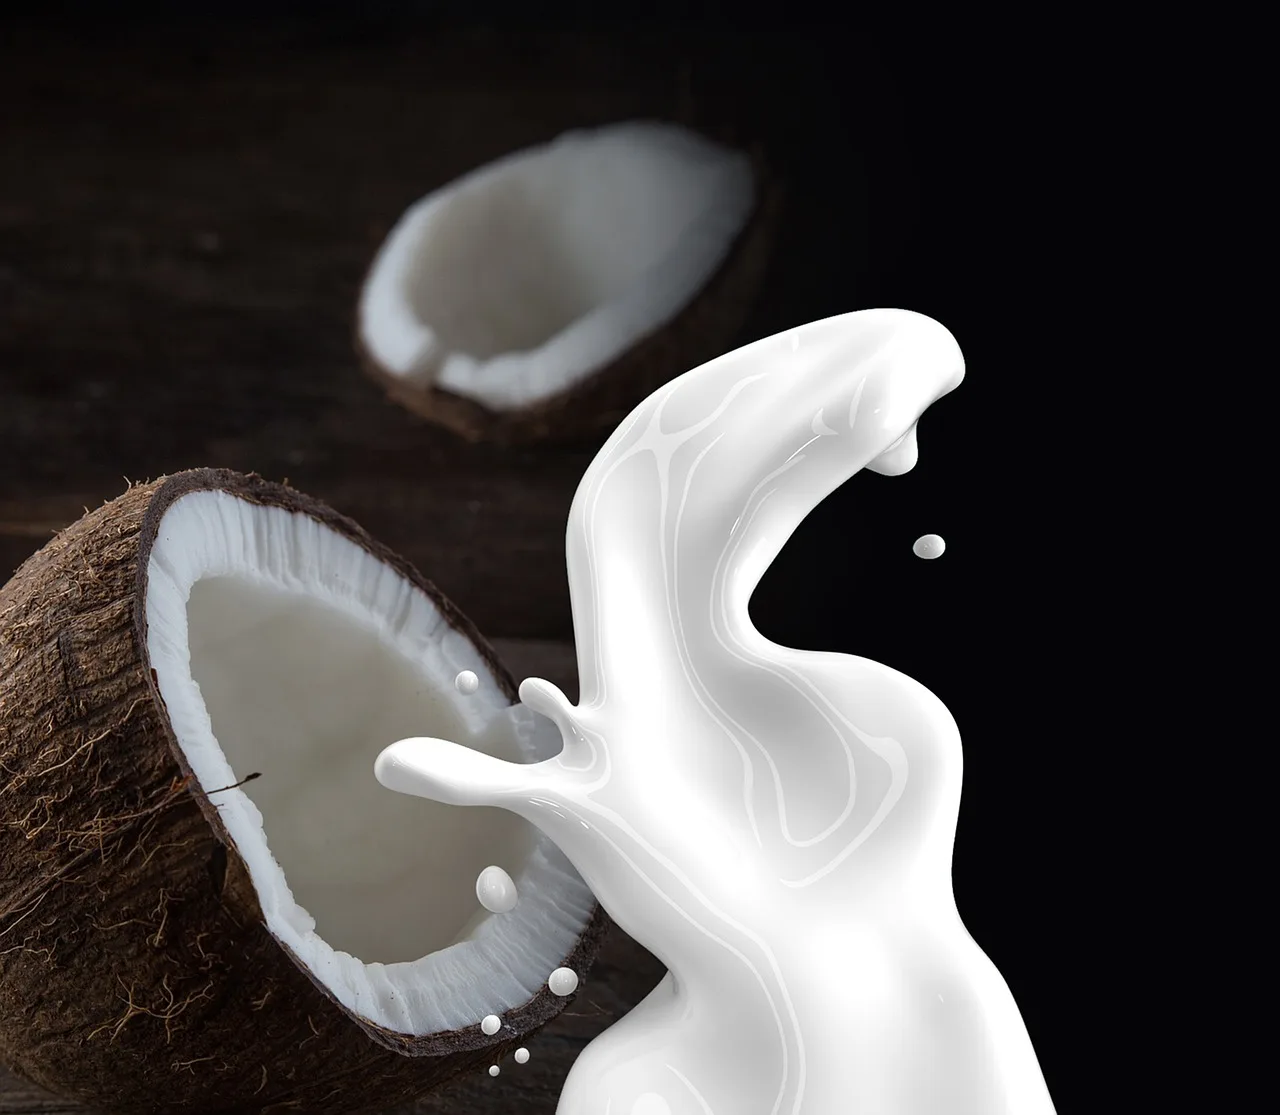 Coconut Milk for Babies: How to Safely Incorporate this Nutritious Alternative